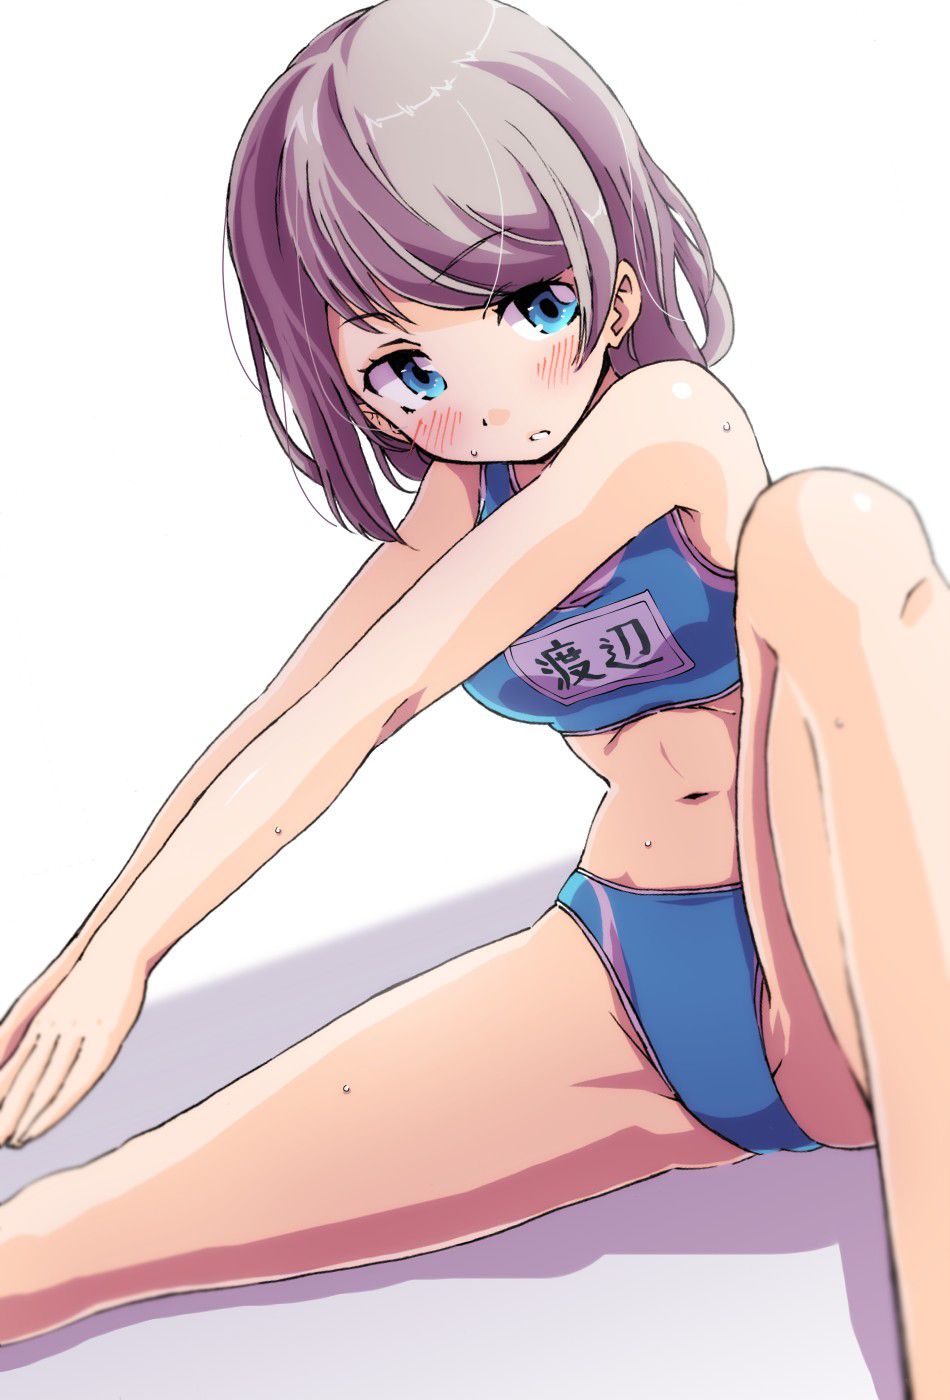 【Secondary erotic】 Here is an erotic image of a girl wearing sportswear and having a body conspicuous 12